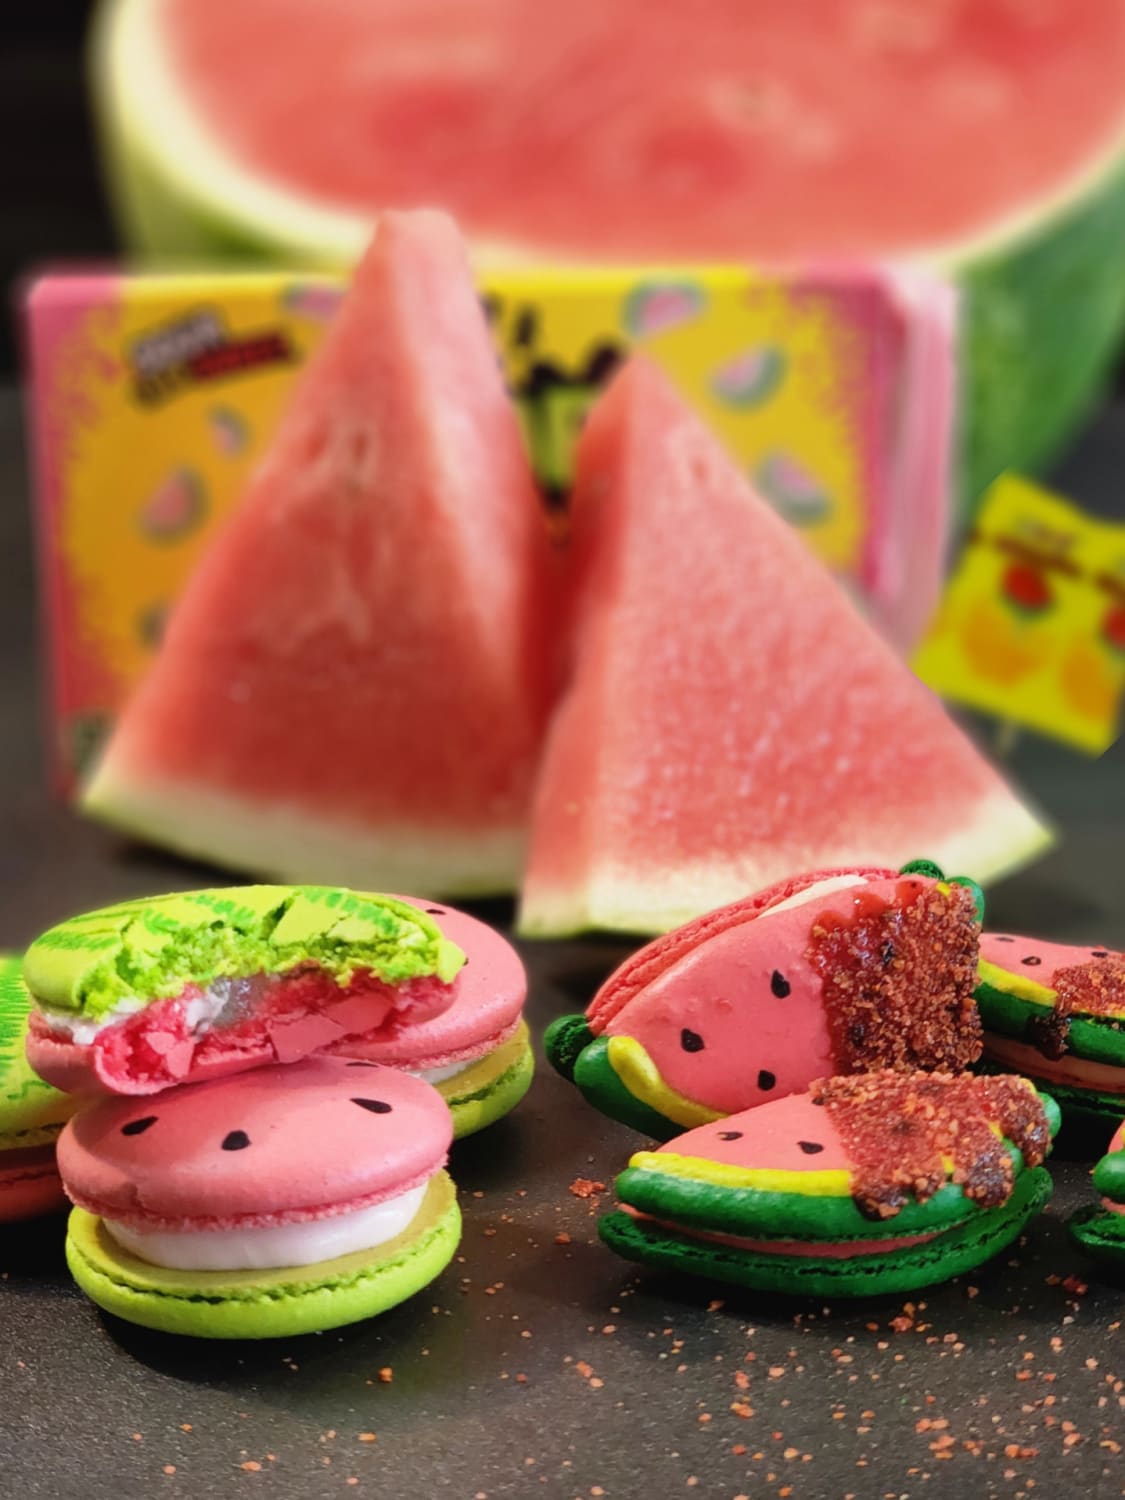 It's watermelon season! So I decided to make some Sour Patch watermelon and sandia chamoy macarons (inspired by those Mexican lollipops I used to eat as a kid )